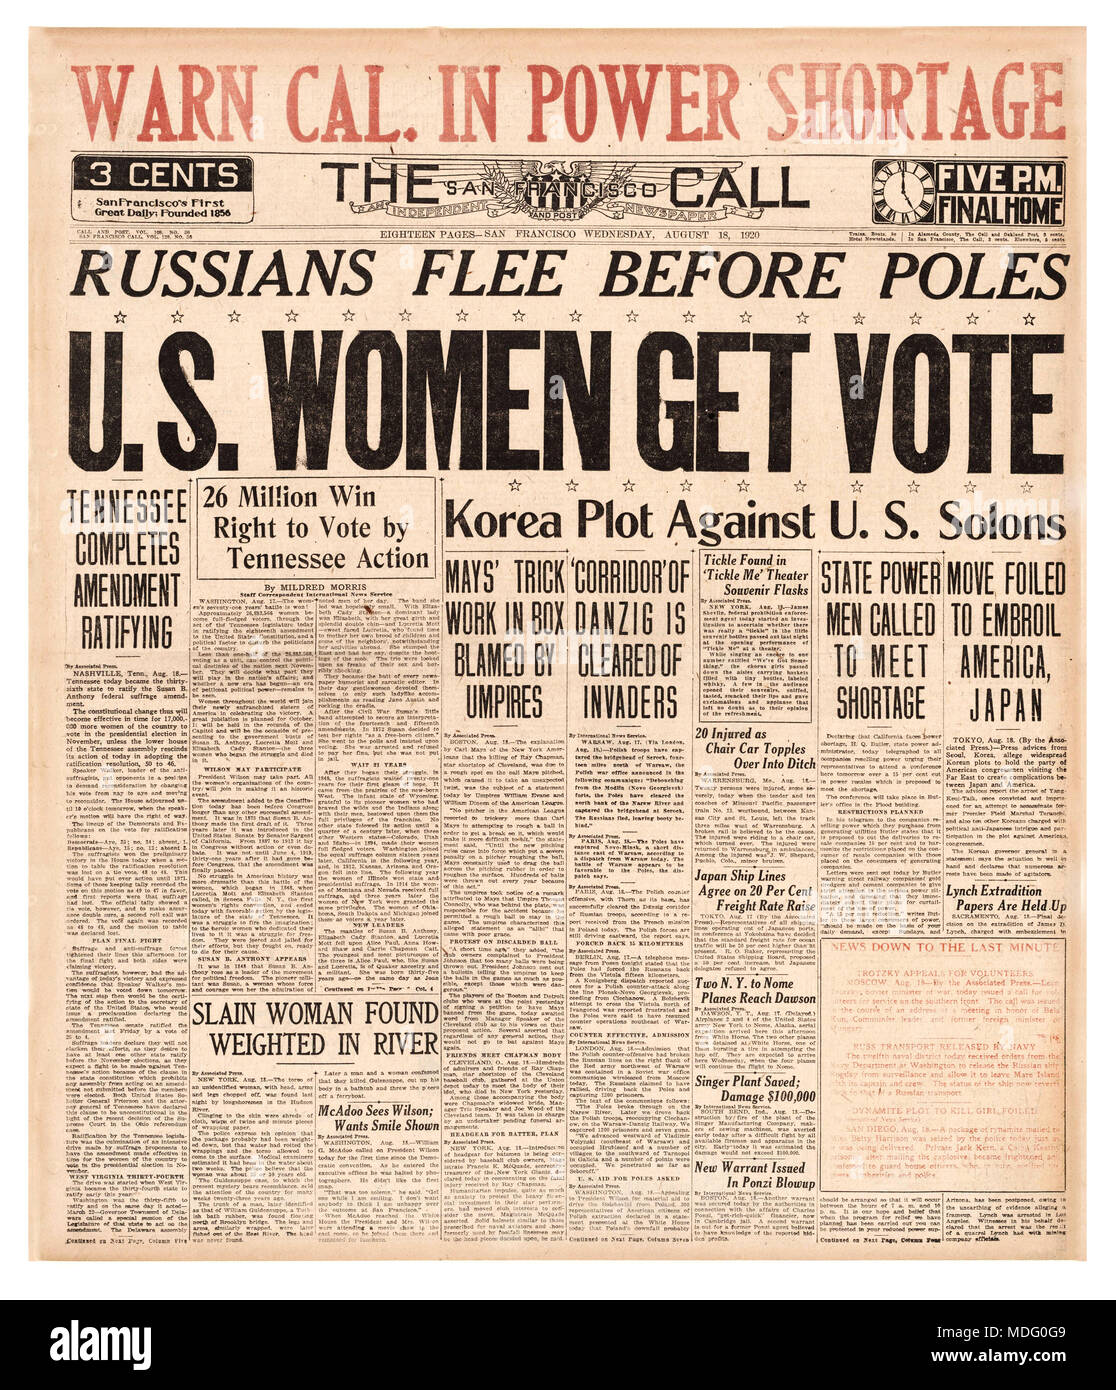 U.S. WOMEN GET VOTE  19th Amendment Newspaper headline Suffrage Vote On Aug 18 1920 Tennessee became the 36th state to ratify the 19th Amendment to the U.S. Constitution. Seven years after the suffrage parade and 72 years after the struggle began, women in every U.S. state finally won right to vote. Stock Photo